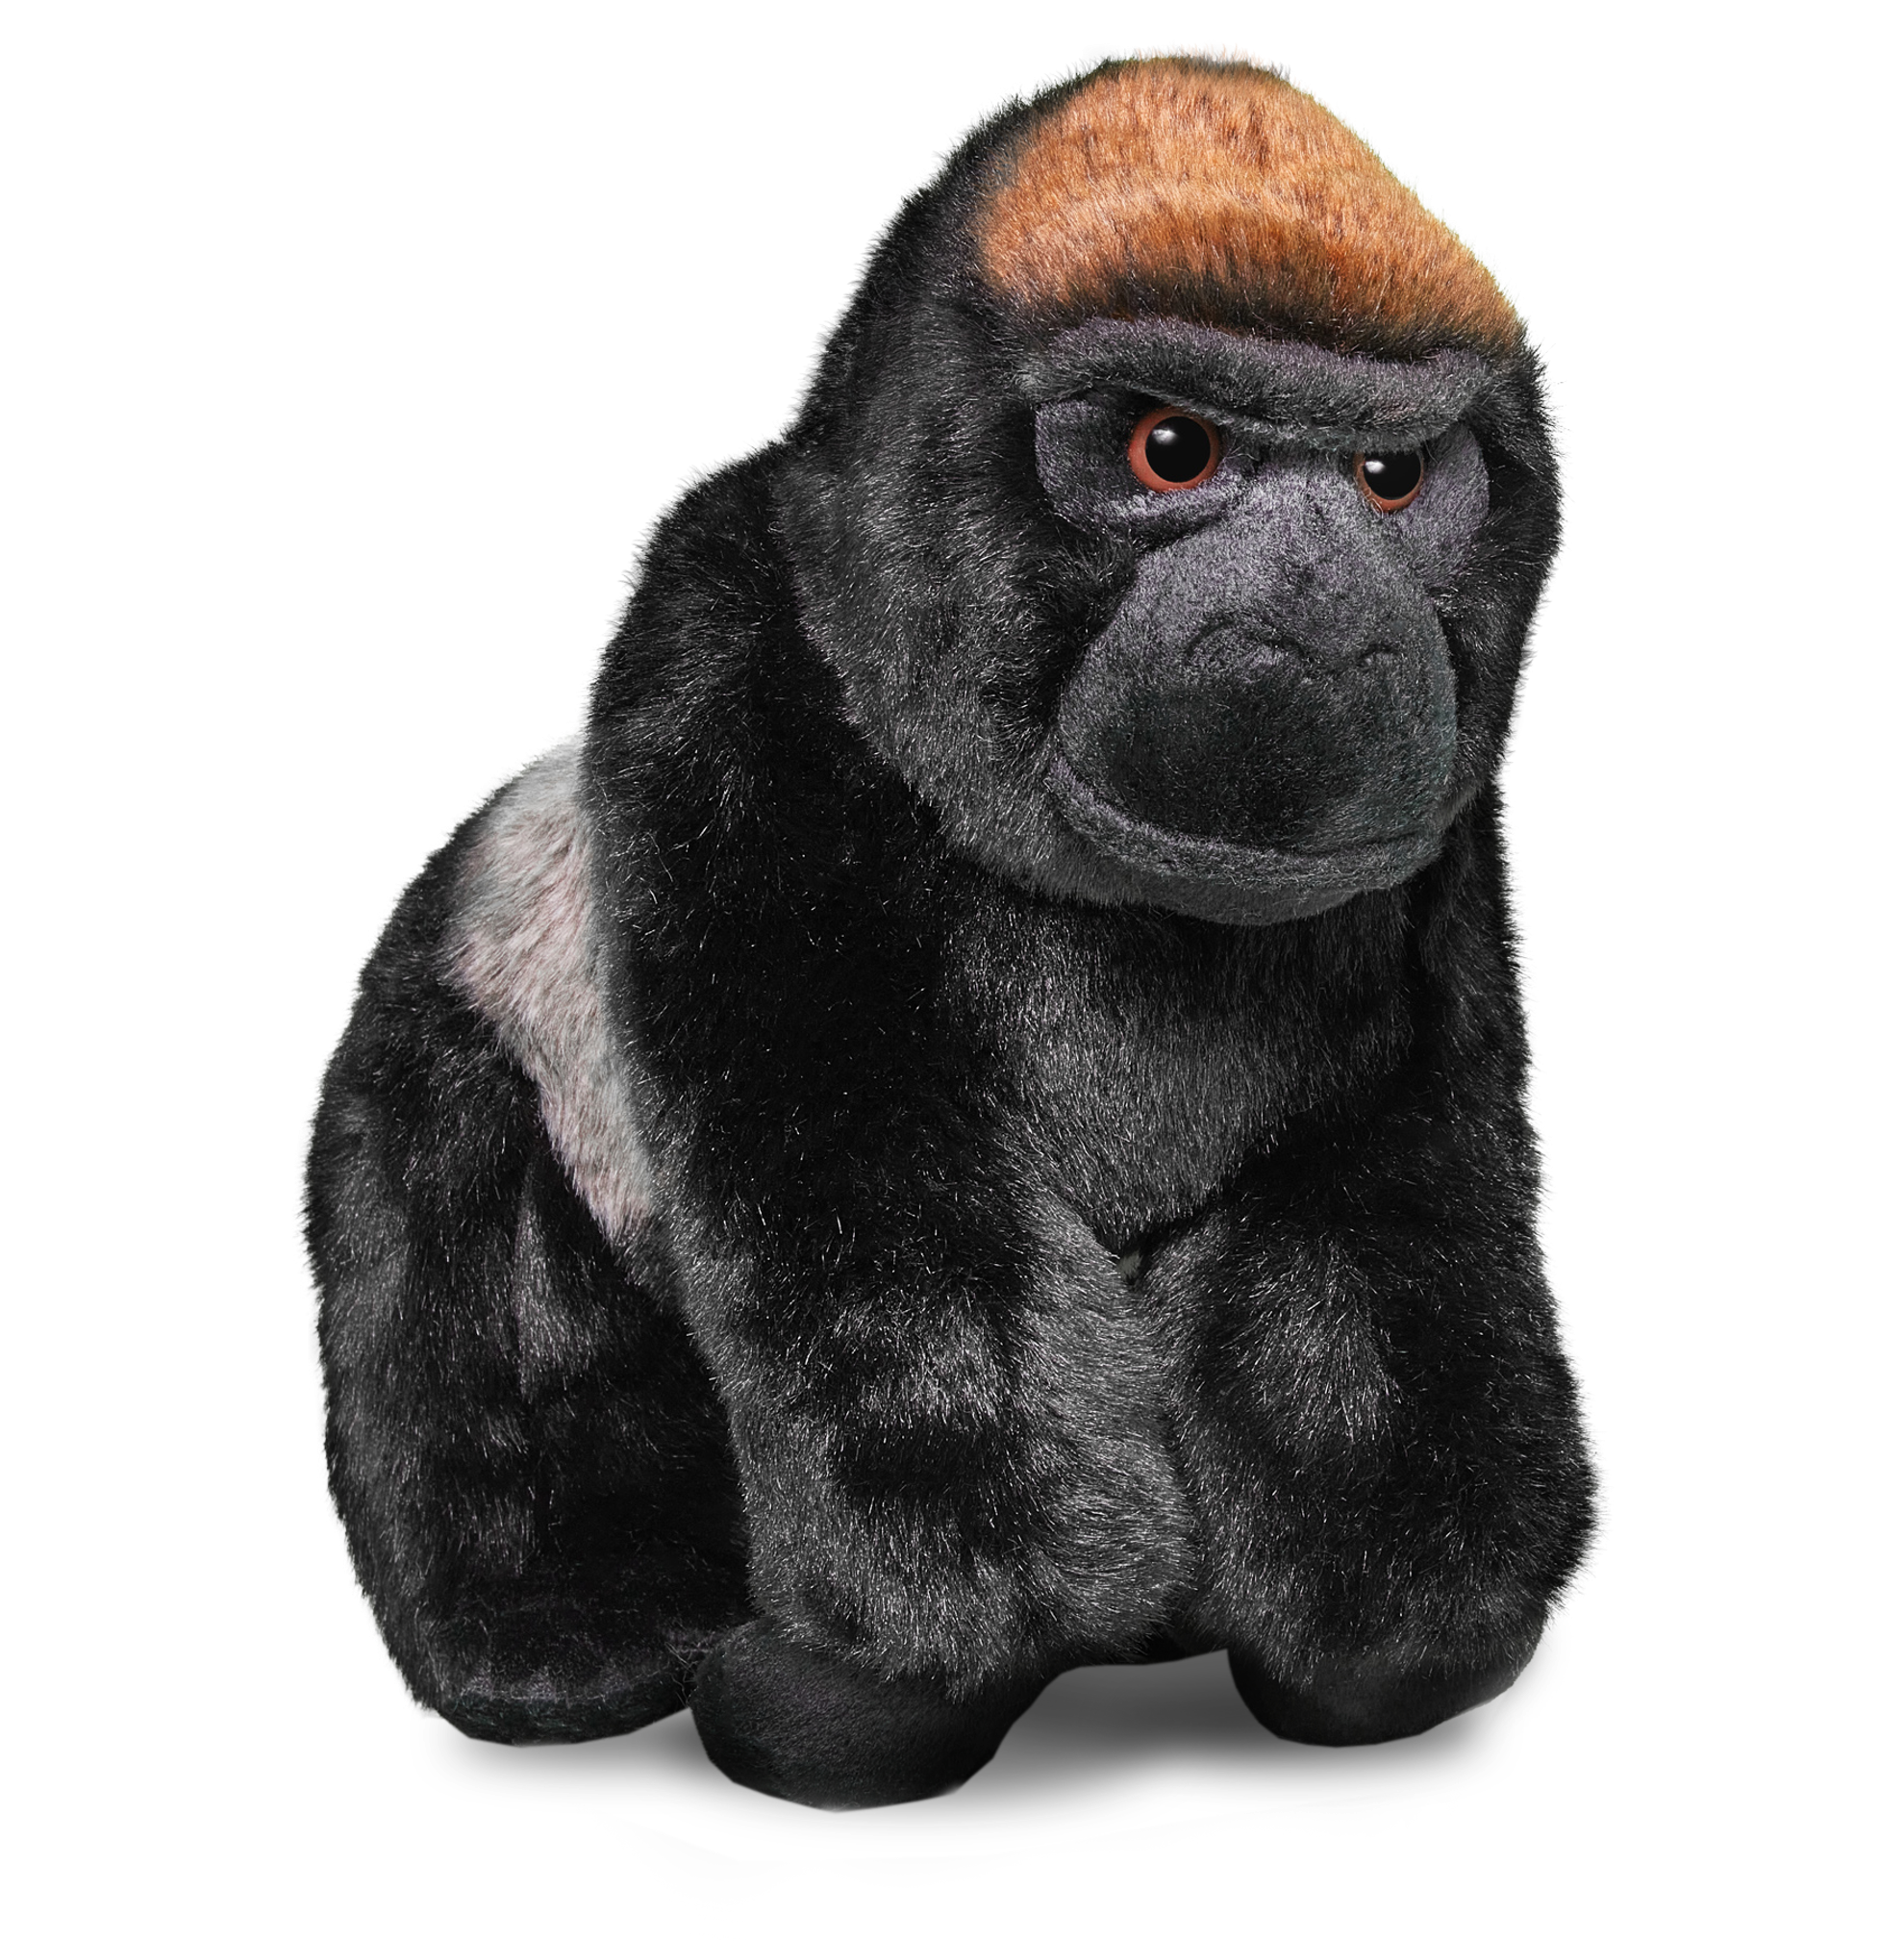 A picture of the gorilla plush toy